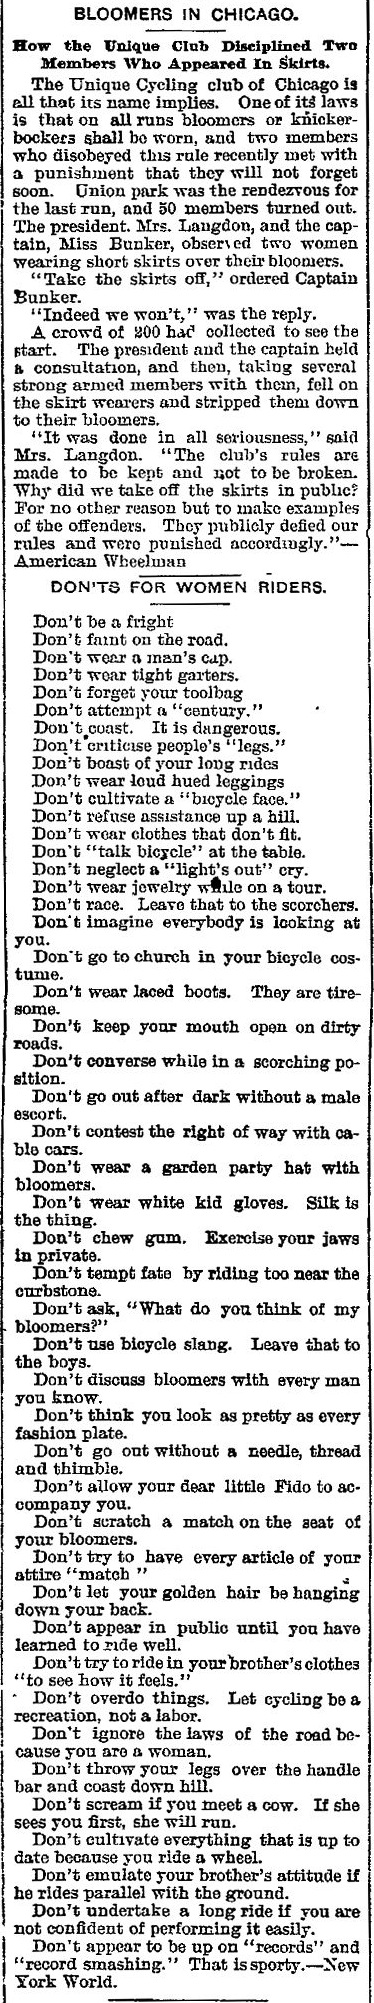 Unique Cycling Club Rules for Women 1895